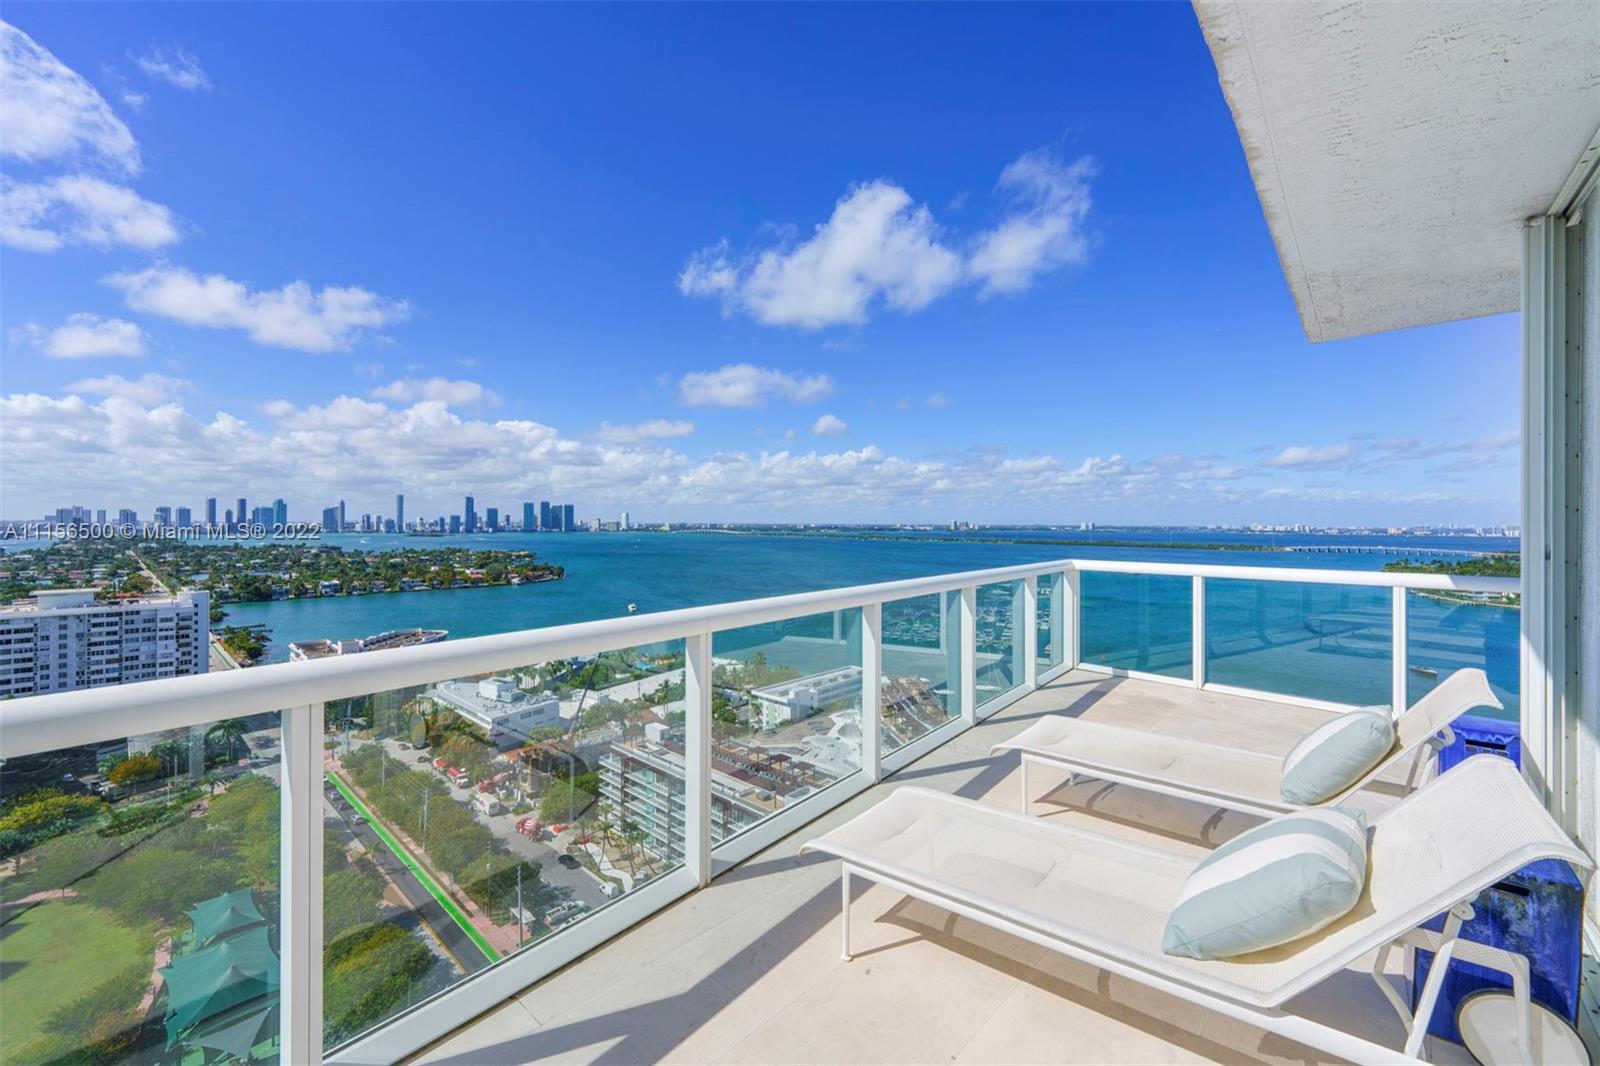 Miami stretches out before you from this one-of-a-kind PH Duplex on coveted Belle Isle. Sweeping vie